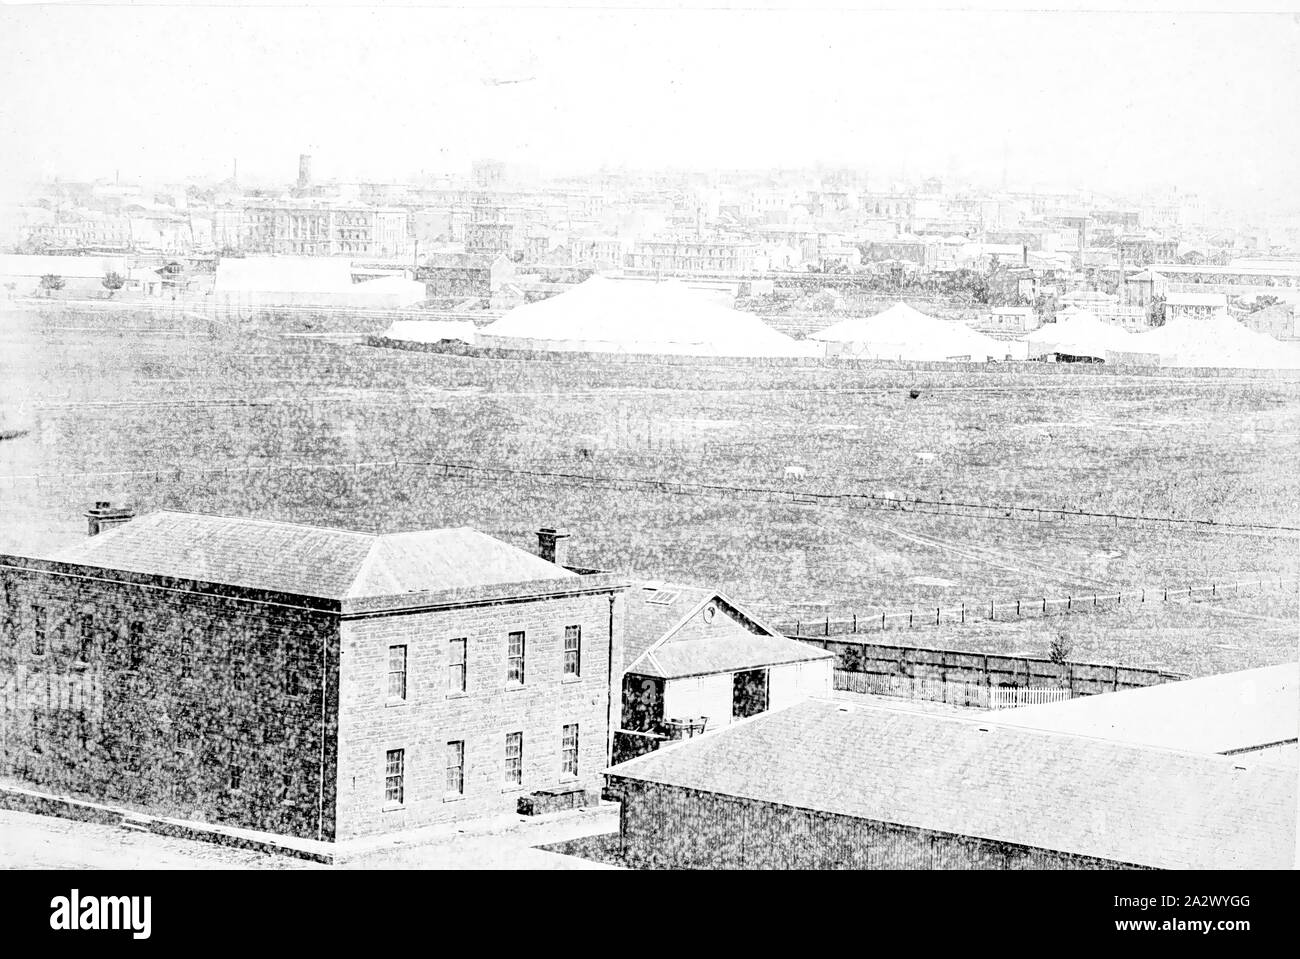 Negative - Melbourne, Victoria, circa 1885, The City of Melbourne is in the background and there are a number of large tents in the middle of the photograph Stock Photo